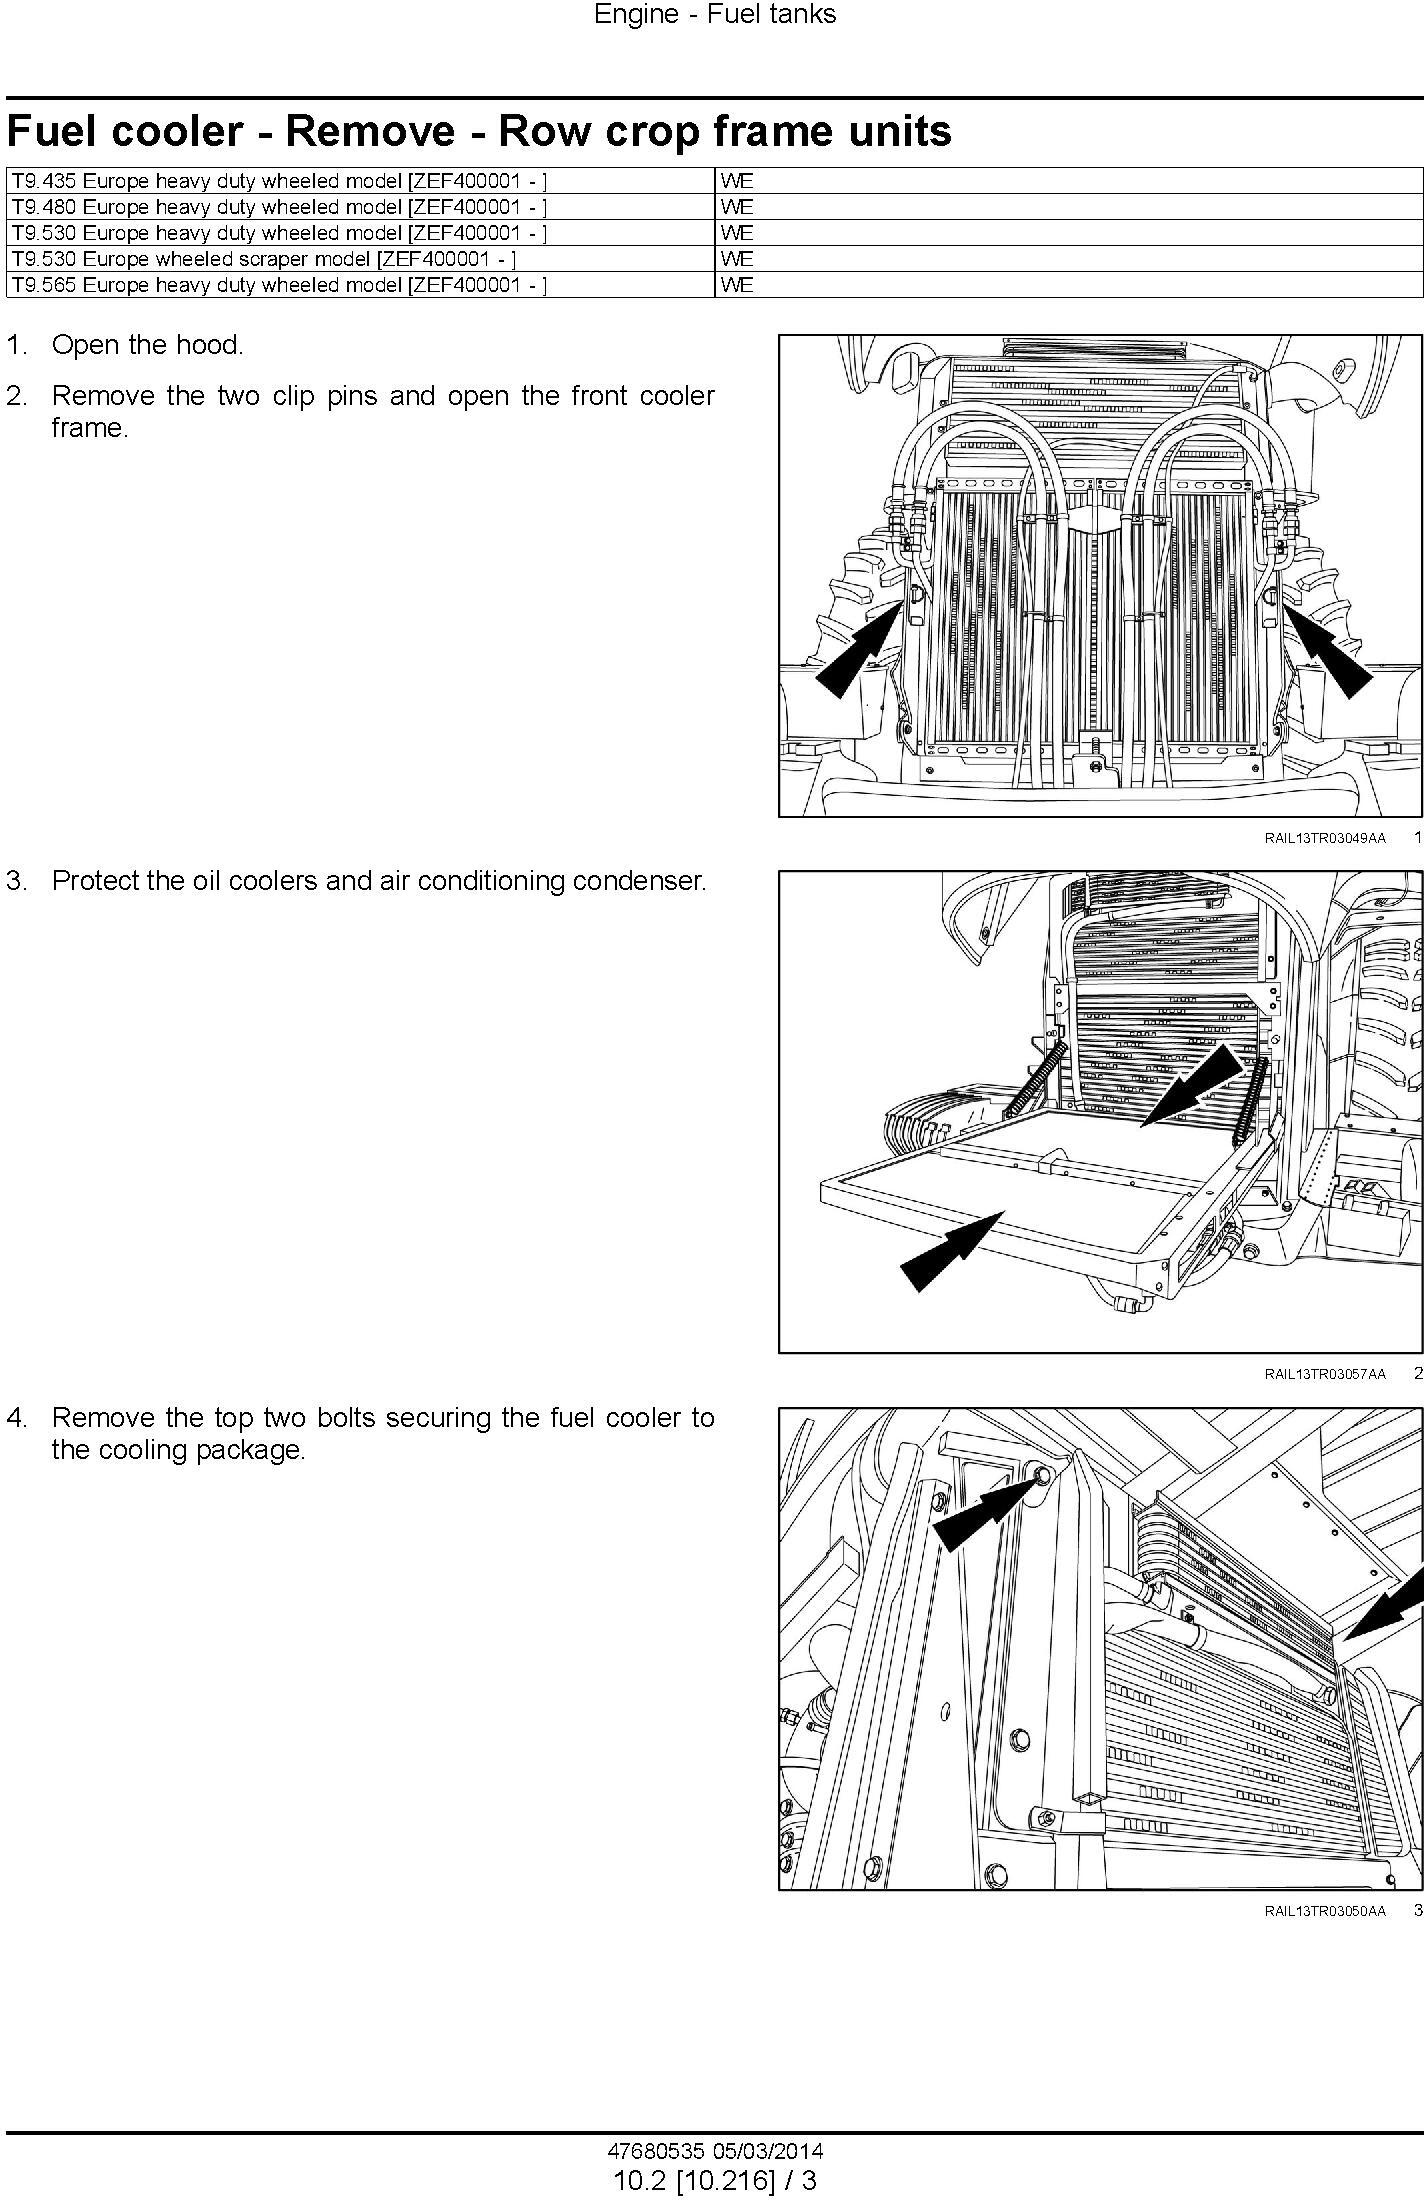 New Holland T9.435, T9.480, T9.530, T9.565, T9.600, T9.645, T9.700 European Tractor Service Manual - 2